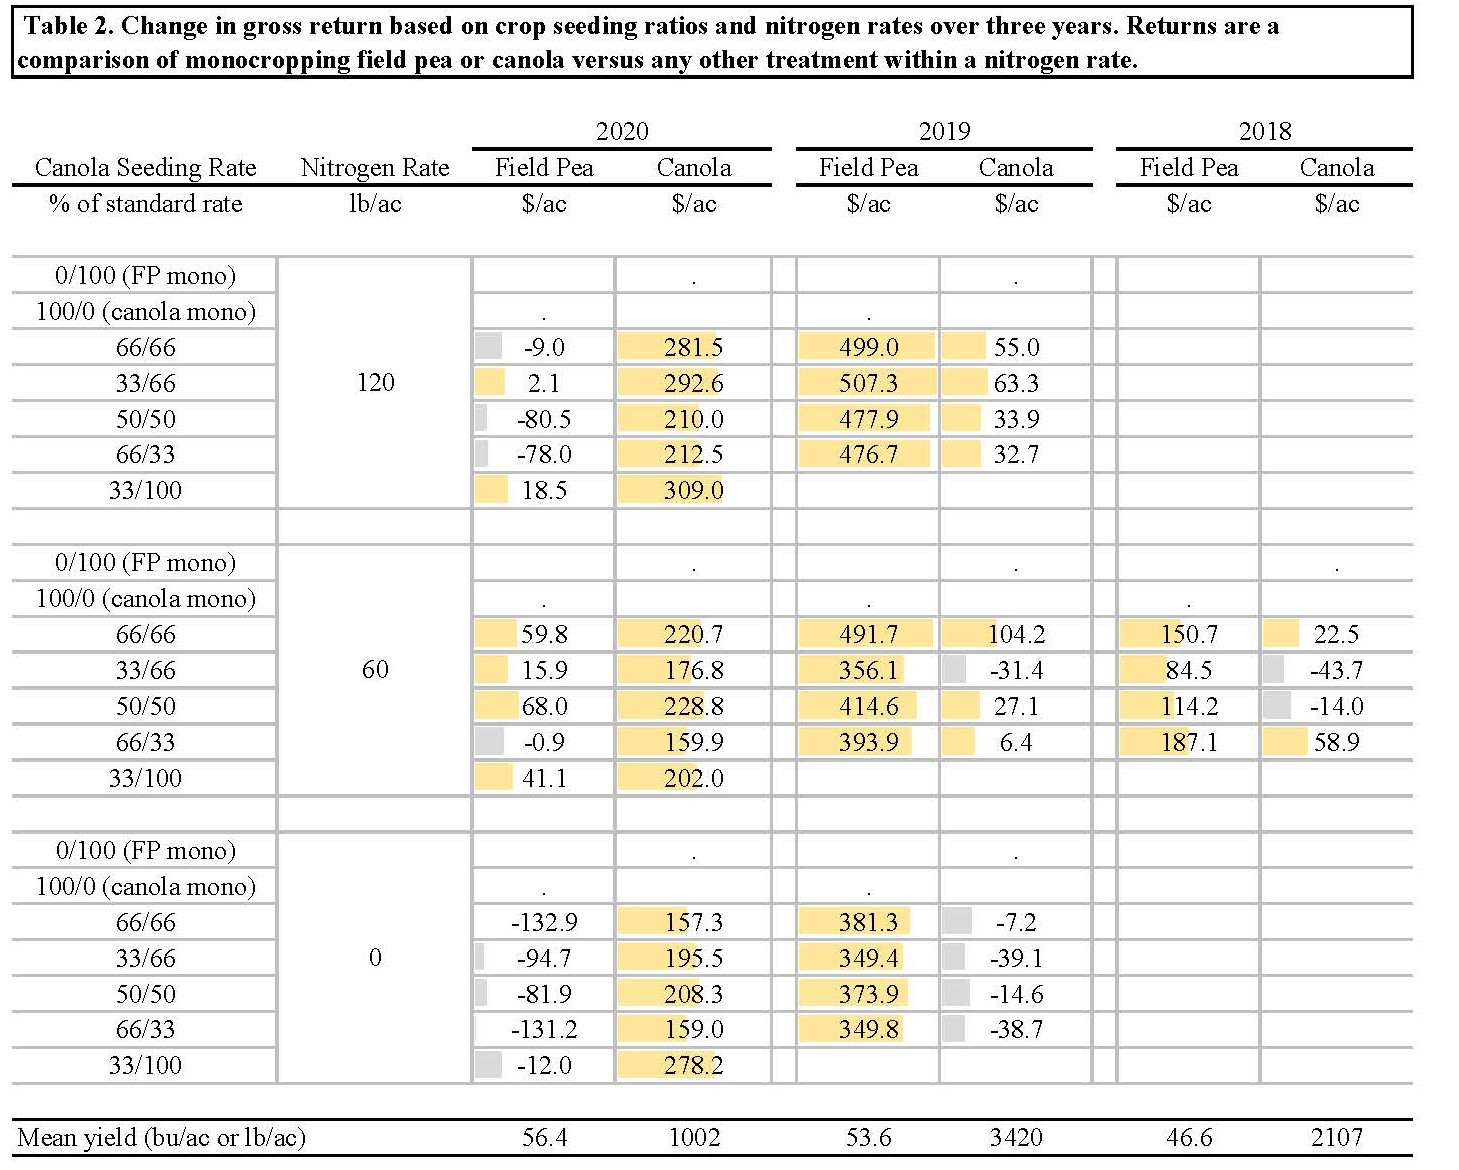 Table showing gross return based on crop seeding ratios and nitrogen rates over three years.